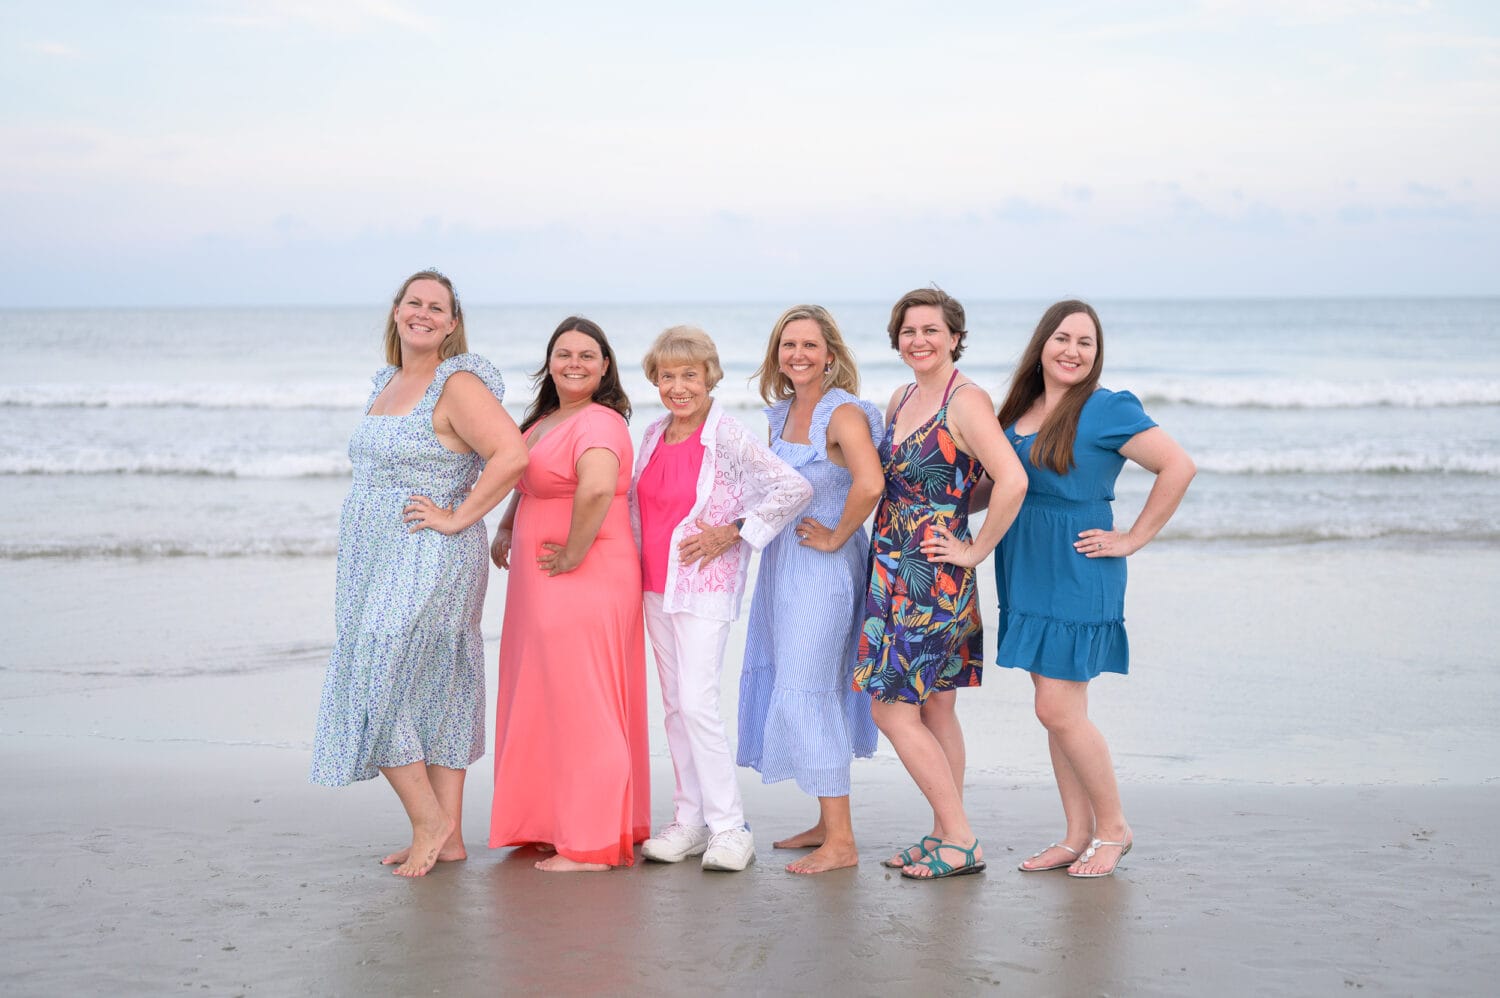 All the girls in the family posing by the ocean - Myrtle Beach